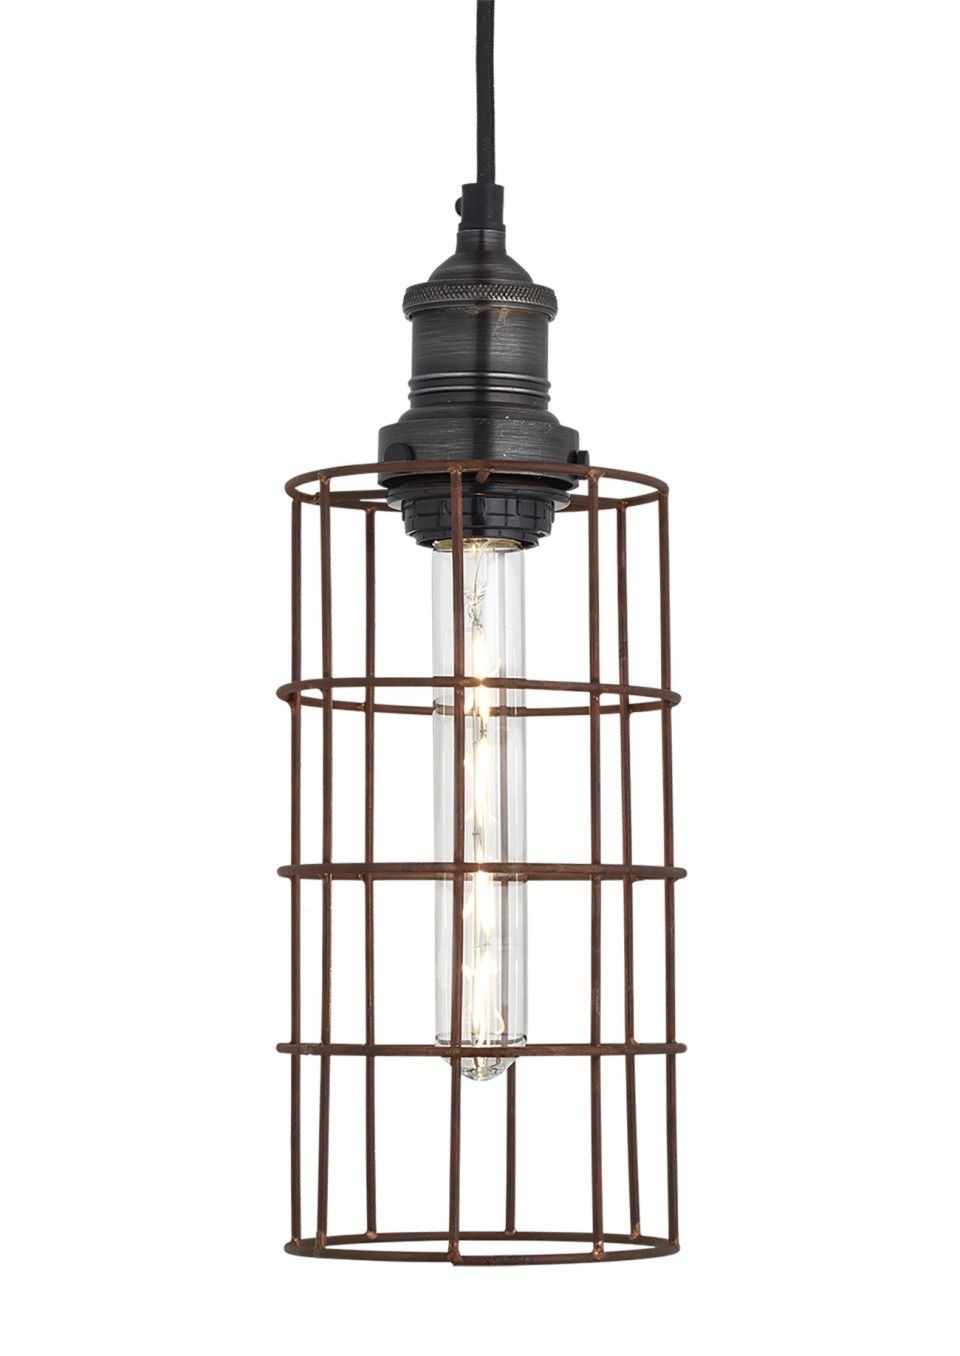 Our Simple Vintage Rusty Cage Wire Pendant Light by Industville is a beautiful handcrafted cylinder shaped